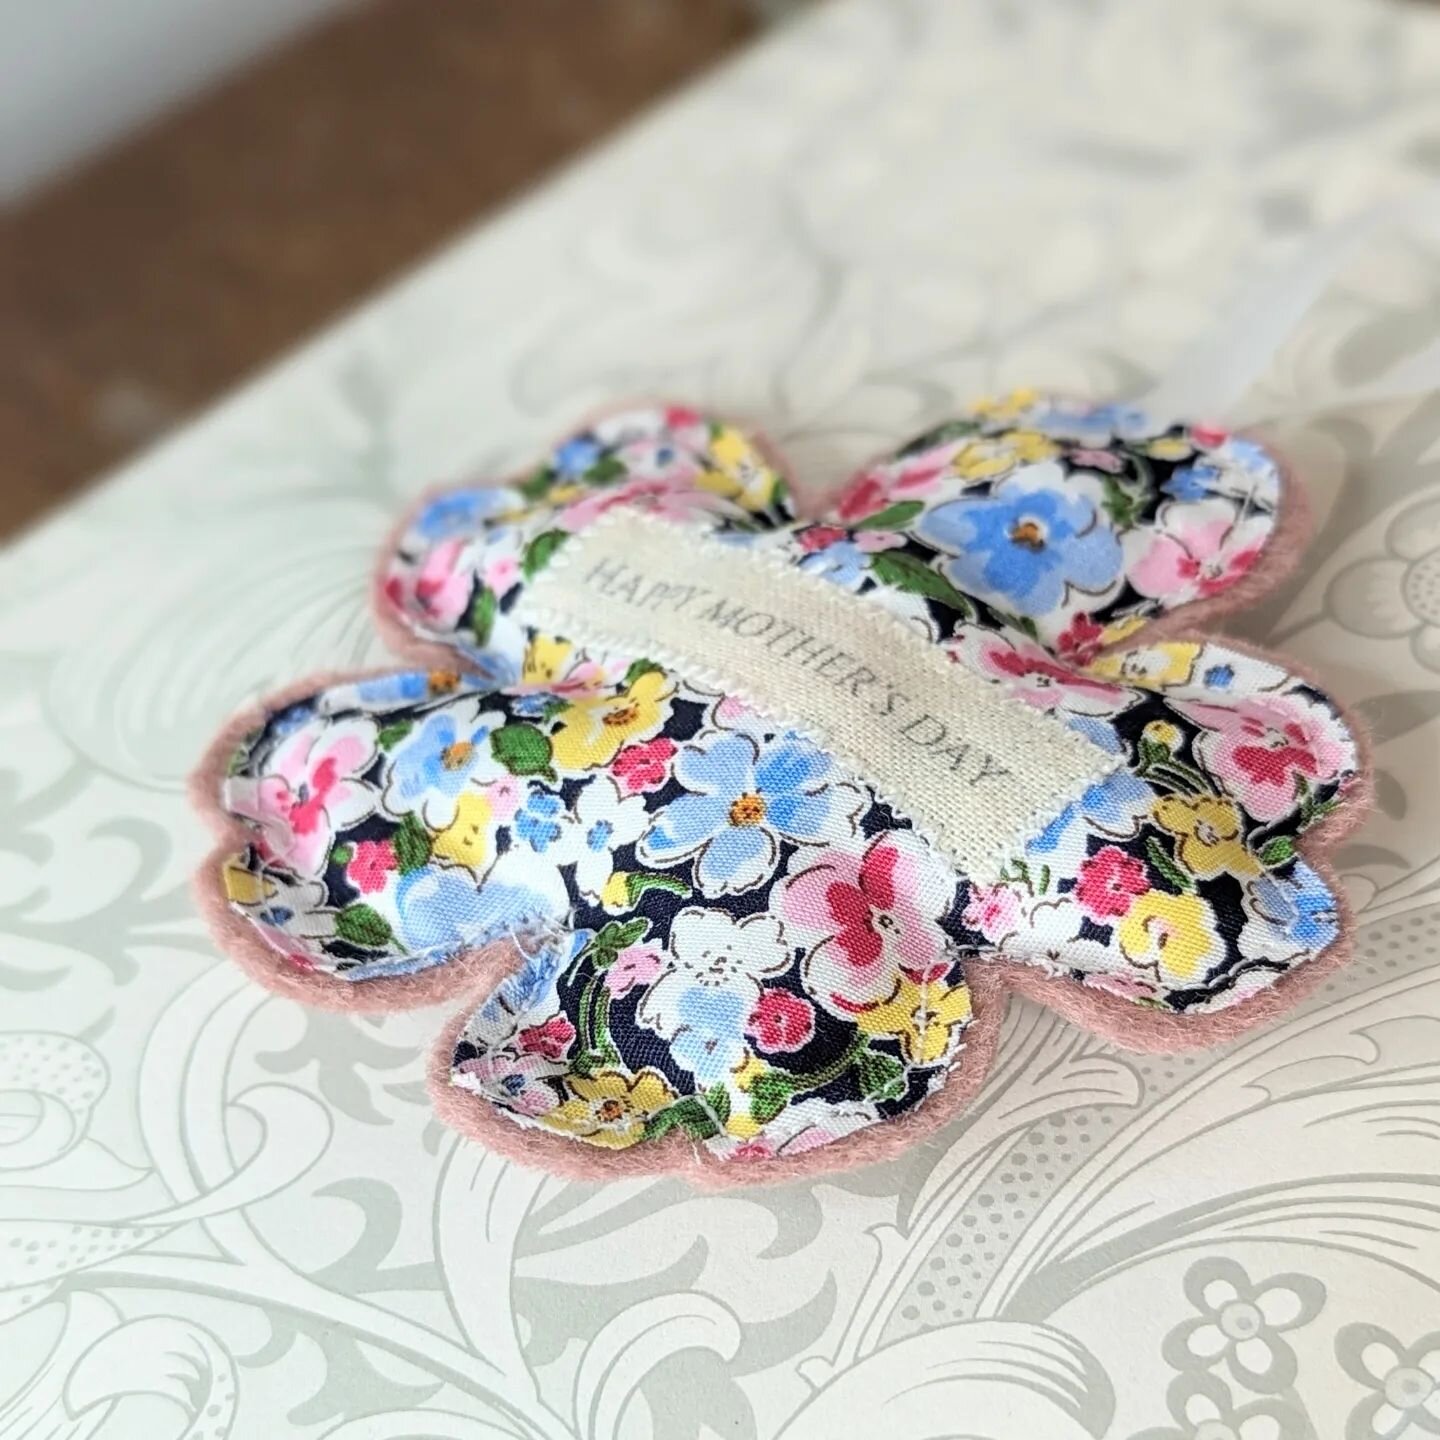 ✨ A handmade Mother's Day ✨

Treat your mum to a handmade gift for mother's day 💐

. . .

#handmade #handmadecrafts #sewingismyhappyplace #sewingismytherapy #sewing  #handmadegifts #handmadegiftsarethebest